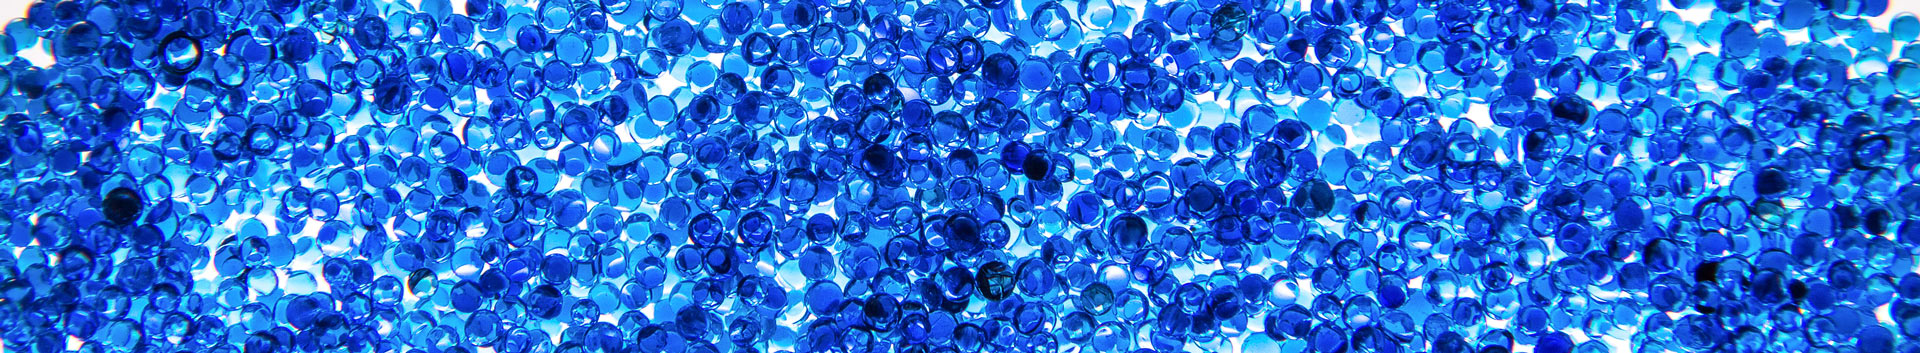 A large pile of vibrant blue resin micro-beads spread out on a light table.